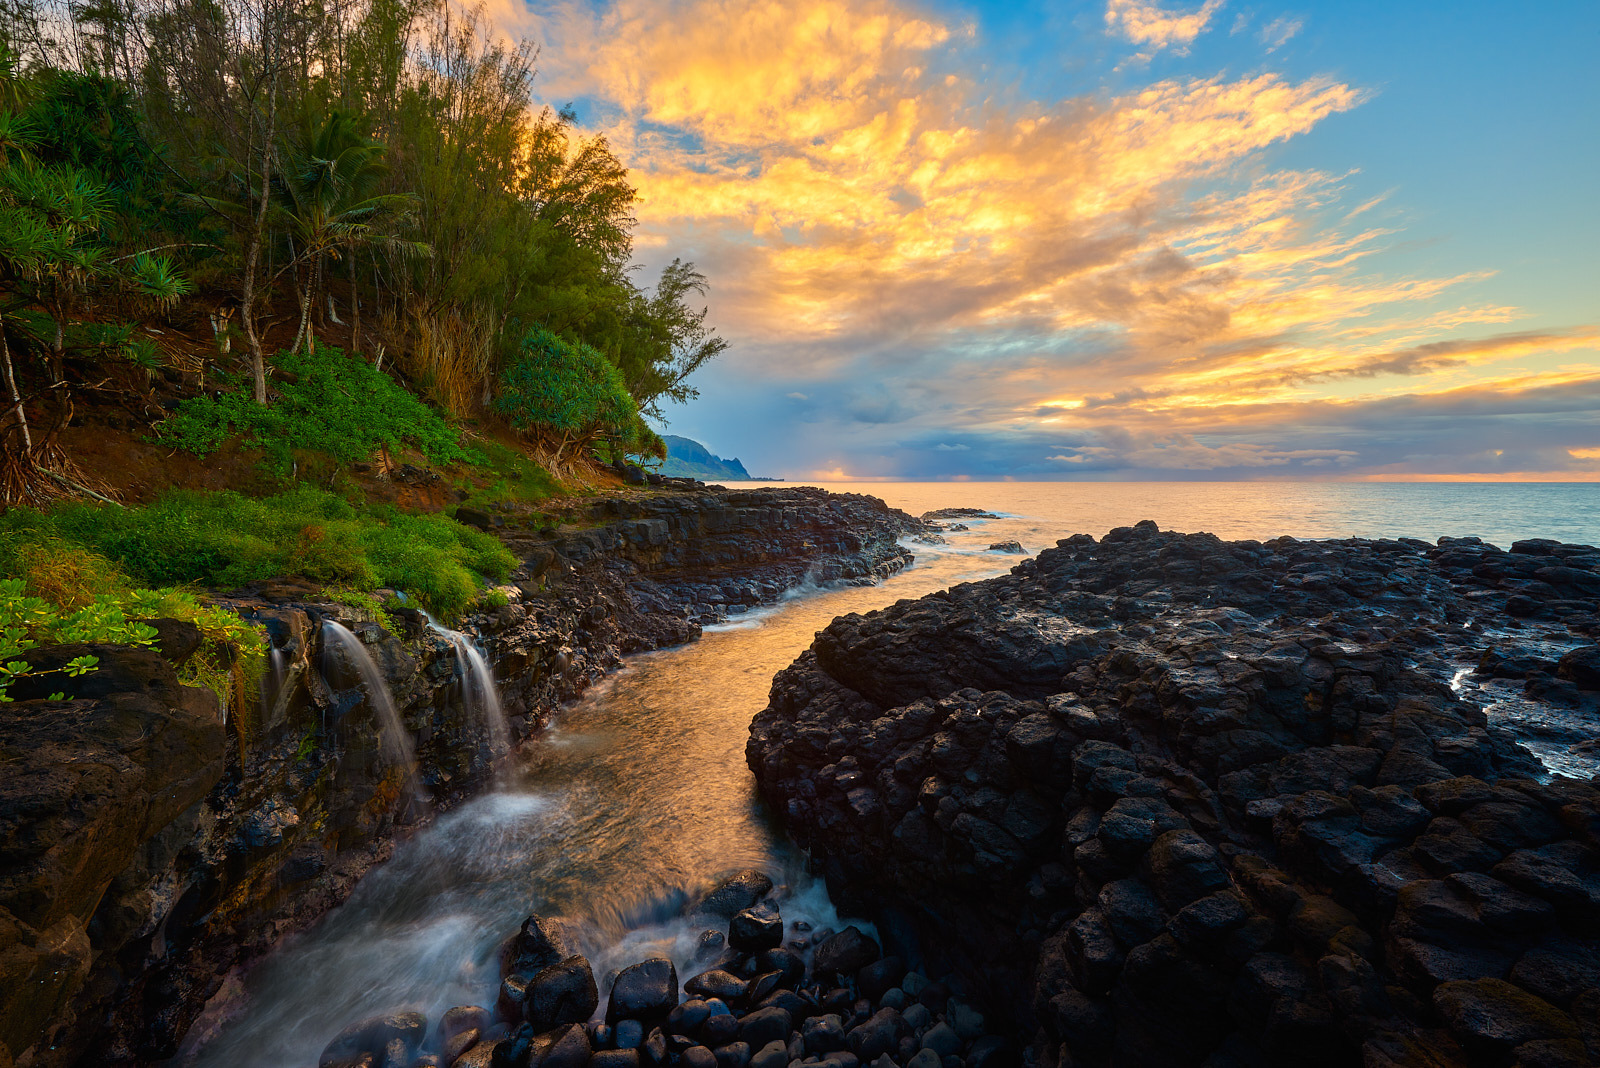 sunset at Queen's Bath on the island of Kauai with a waterfall flowing into the ocean along the lava rock.  Fine art photography by Andrew Shoemaker